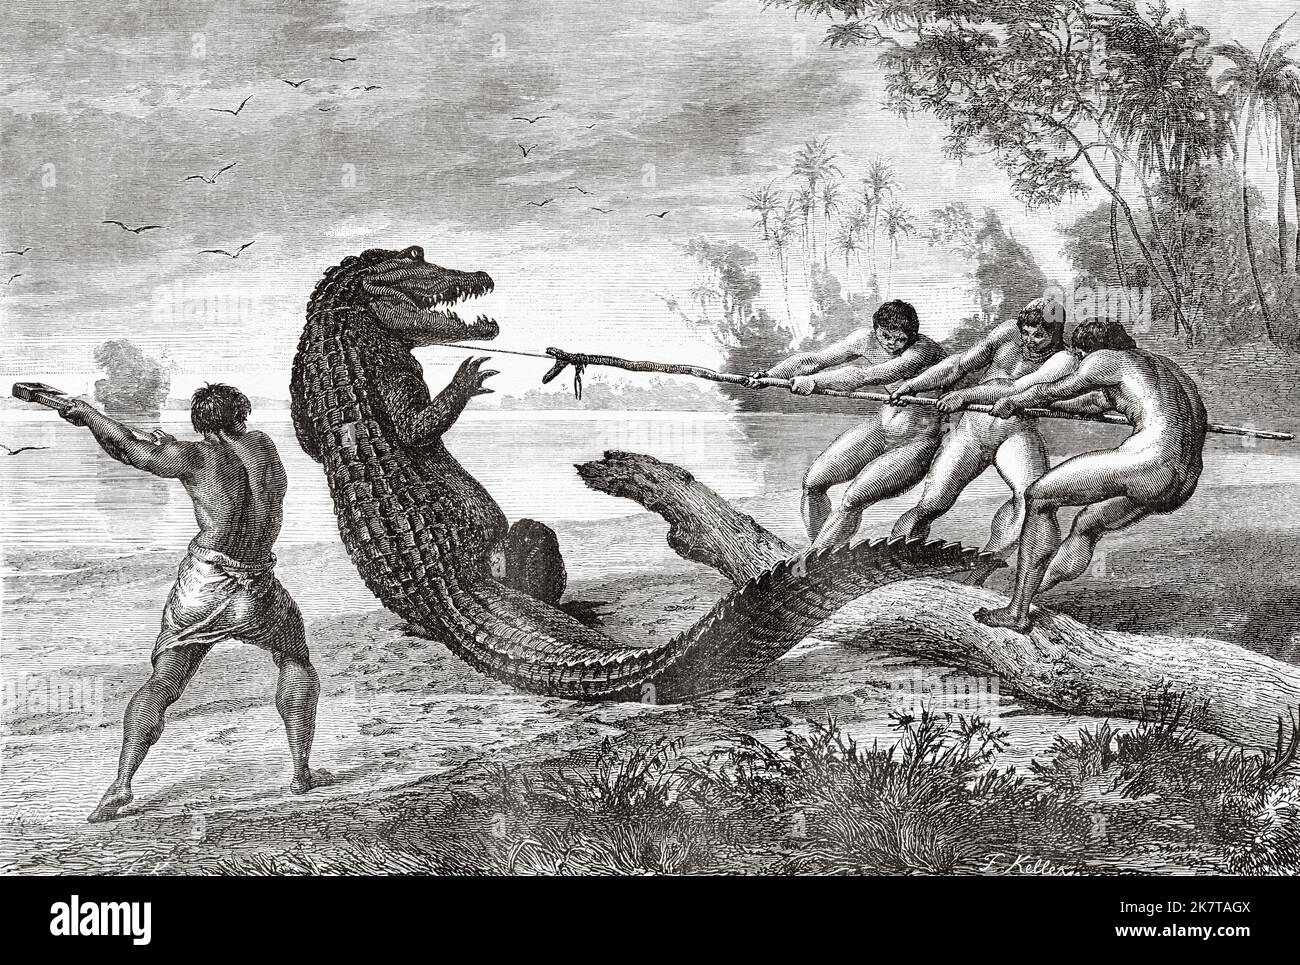 Indigenous people killing an alligator, Brazil, South America. Exploration of the Rivers Amazon and Madeira in the Brazilian Empire by Franz Keller-Leuzinger, 1867 Stock Photo